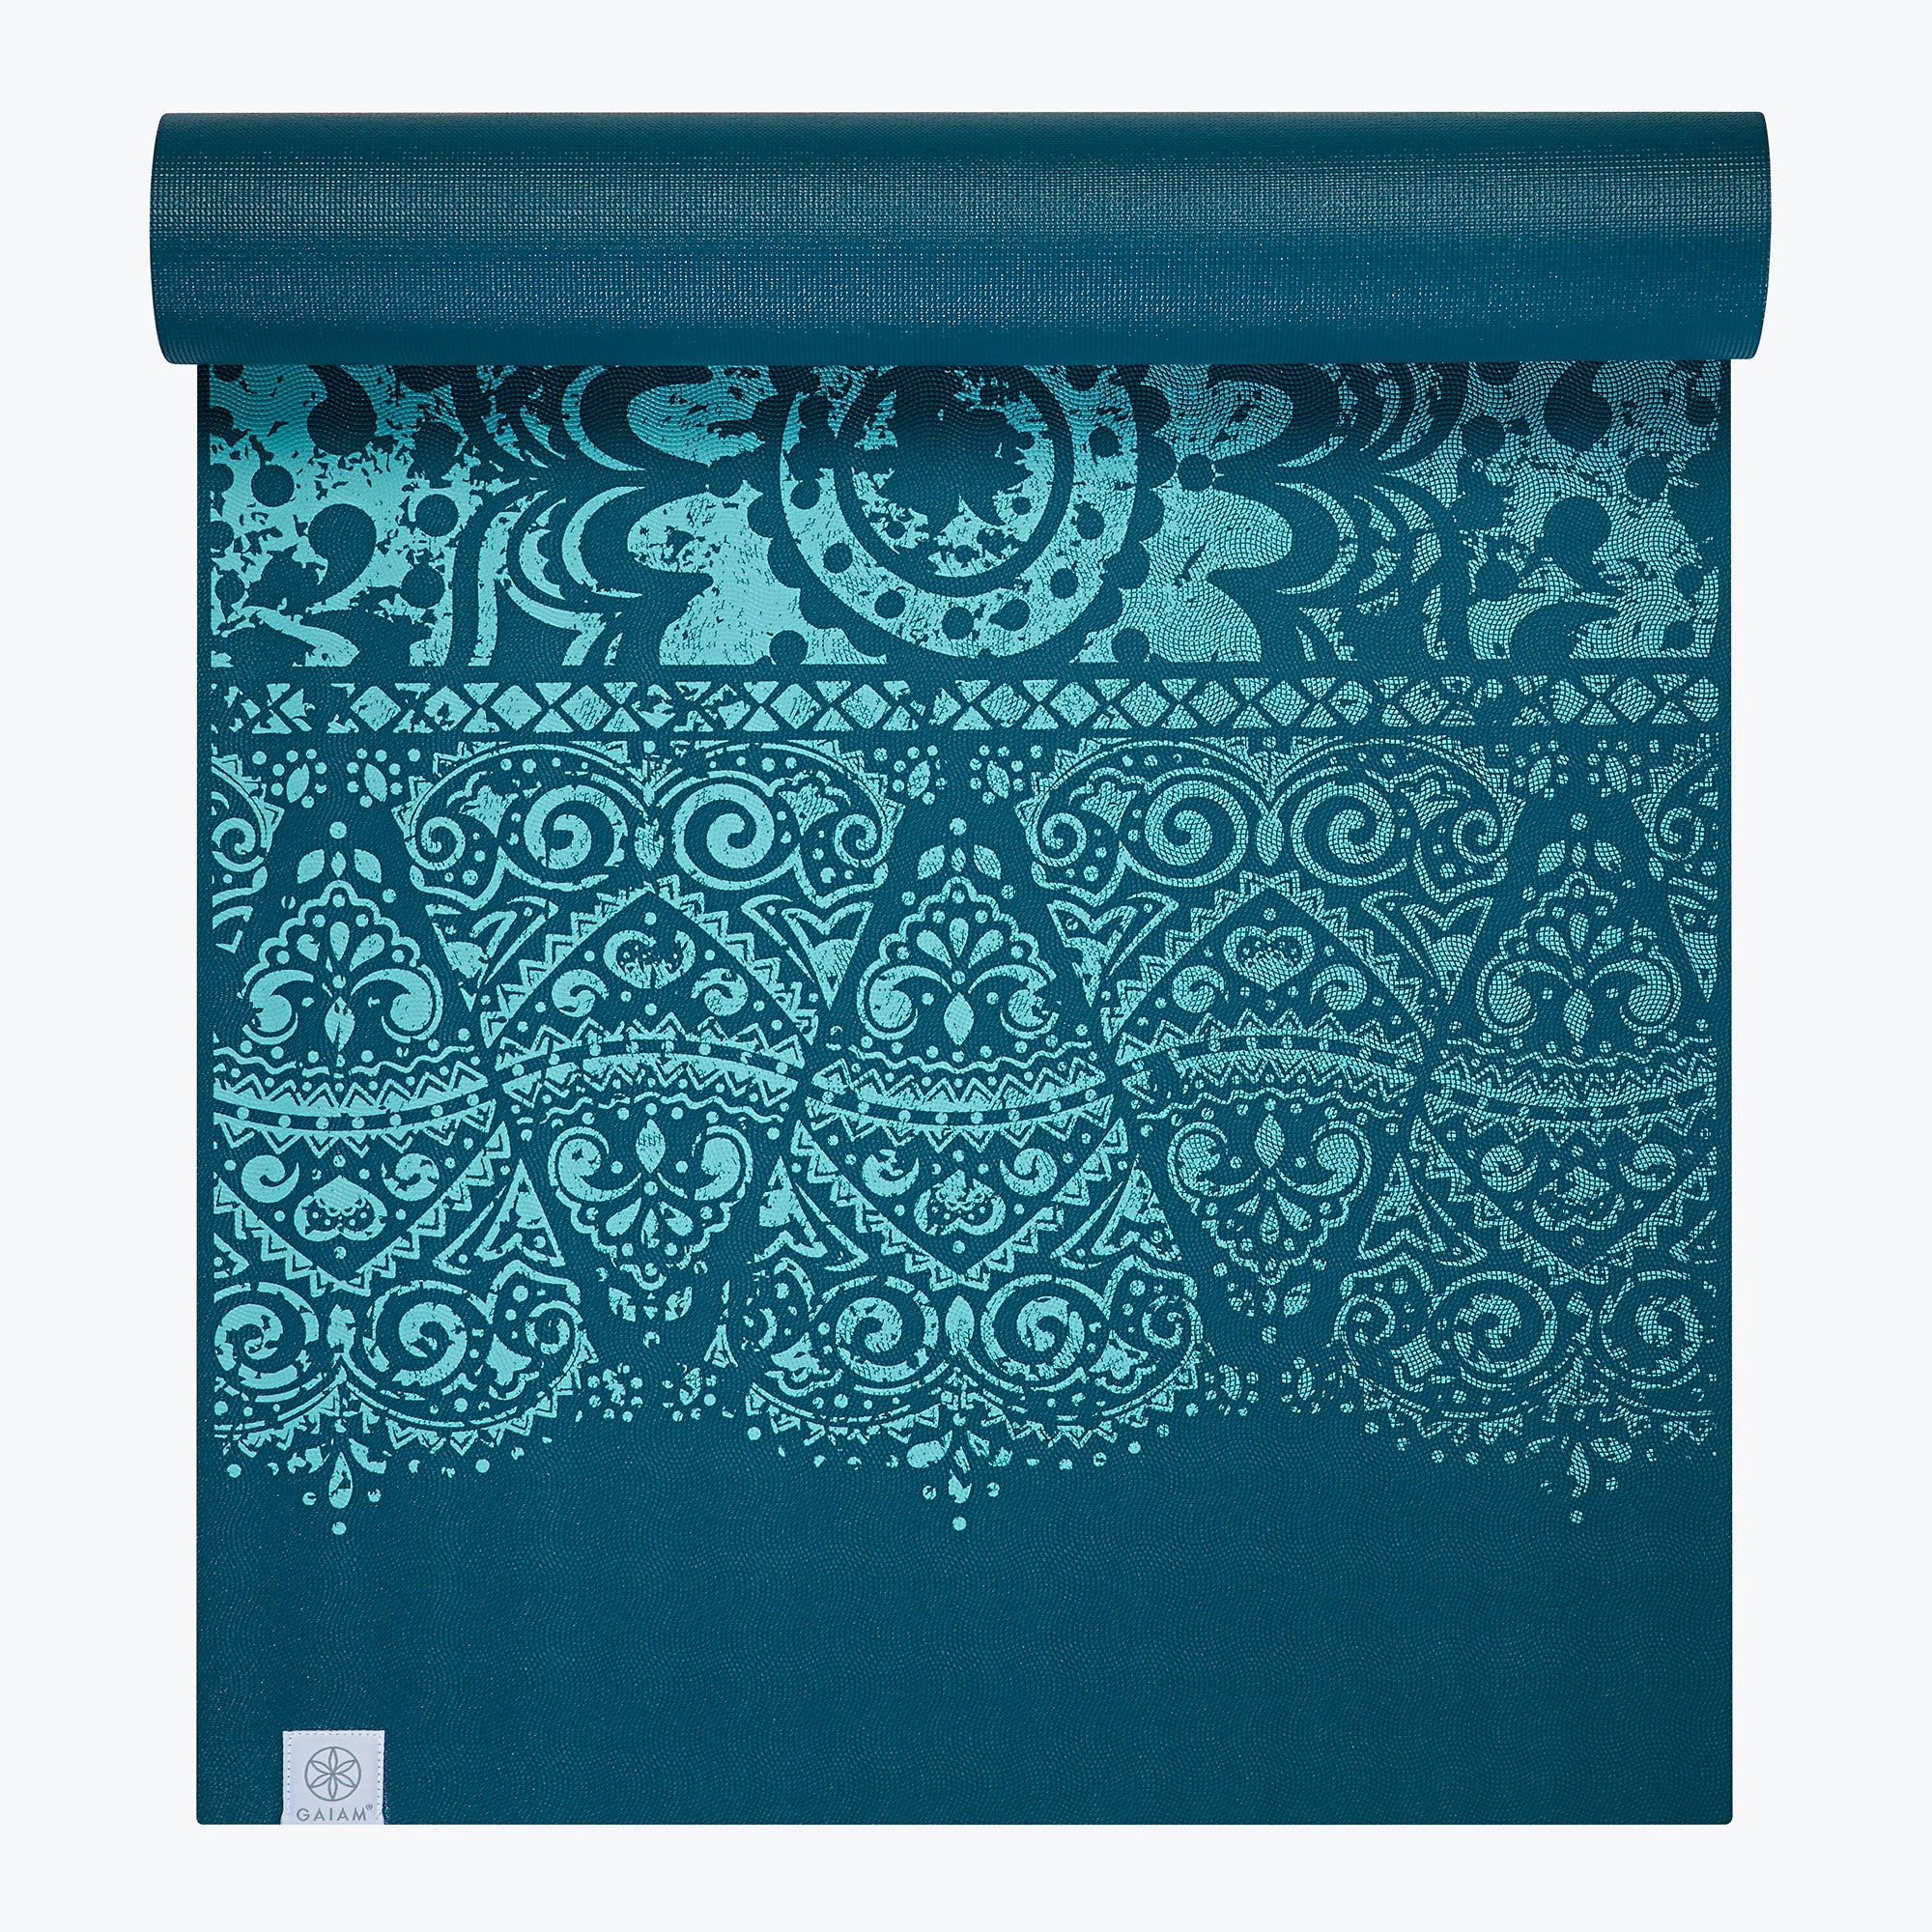 Performance Stable Grip Yoga Mat (6mm) by Gaiam - Work Well Daily